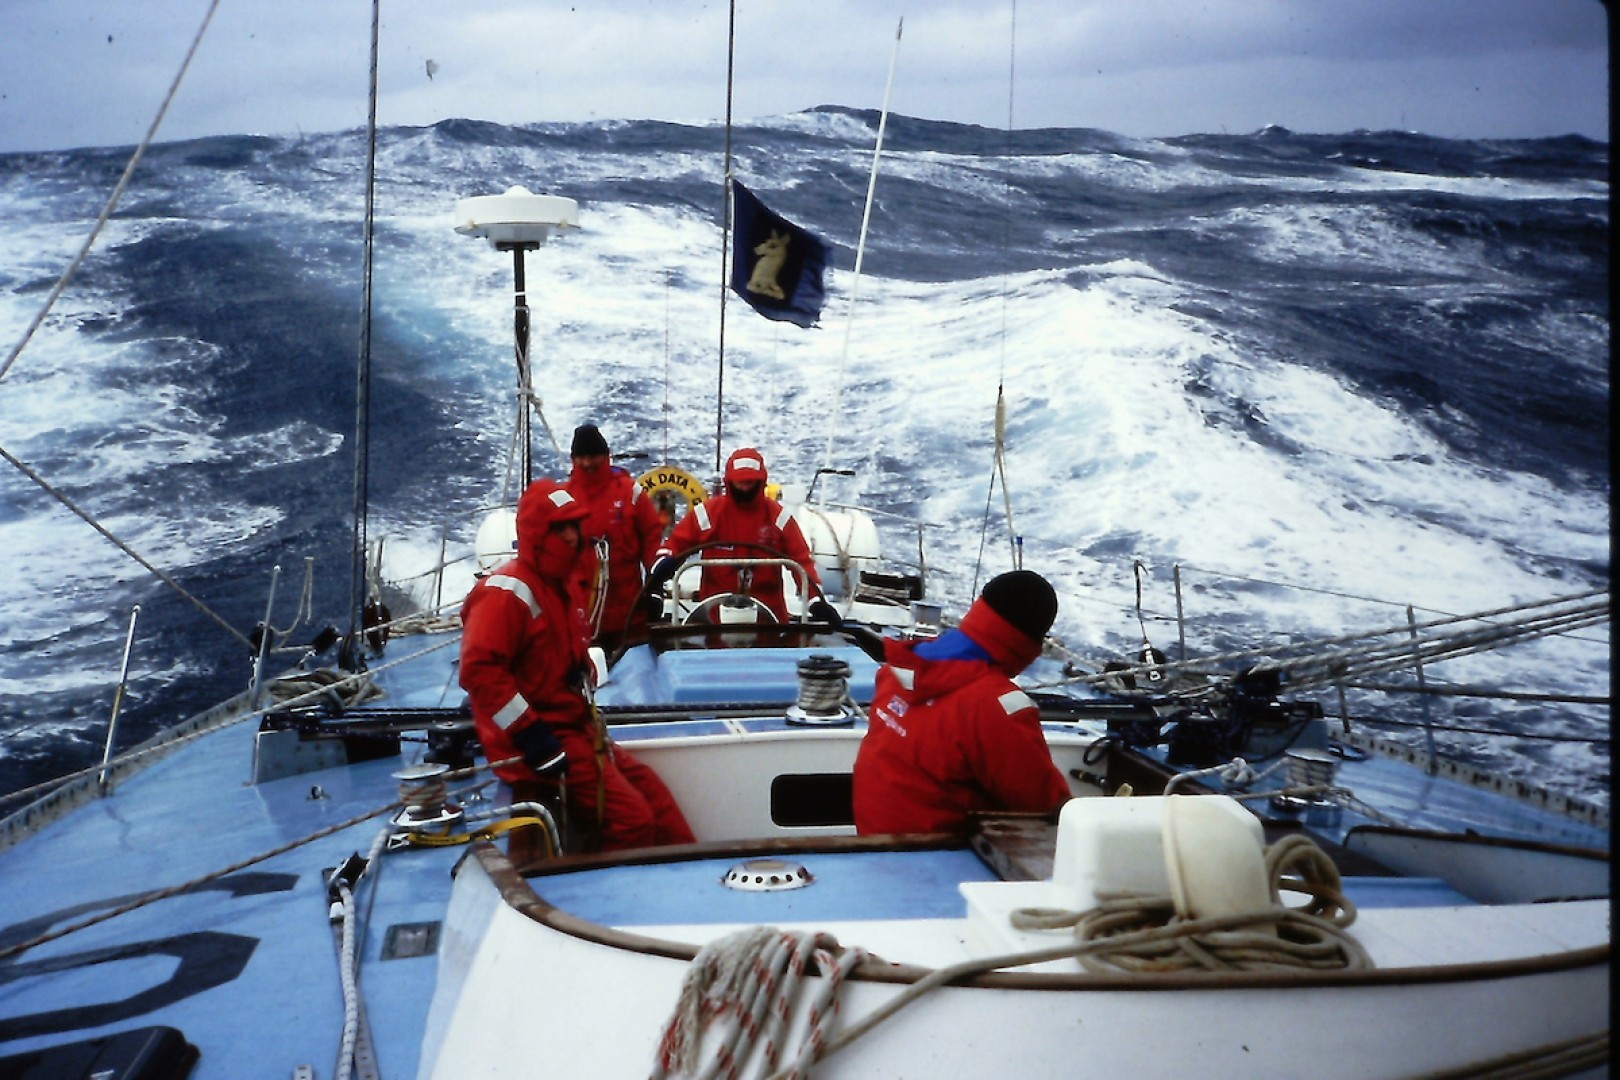 Surfing down the waves in the Southern Ocean onboard Norsk Data GB (1985 - 86 Race ). Credit: Philip McDonald.